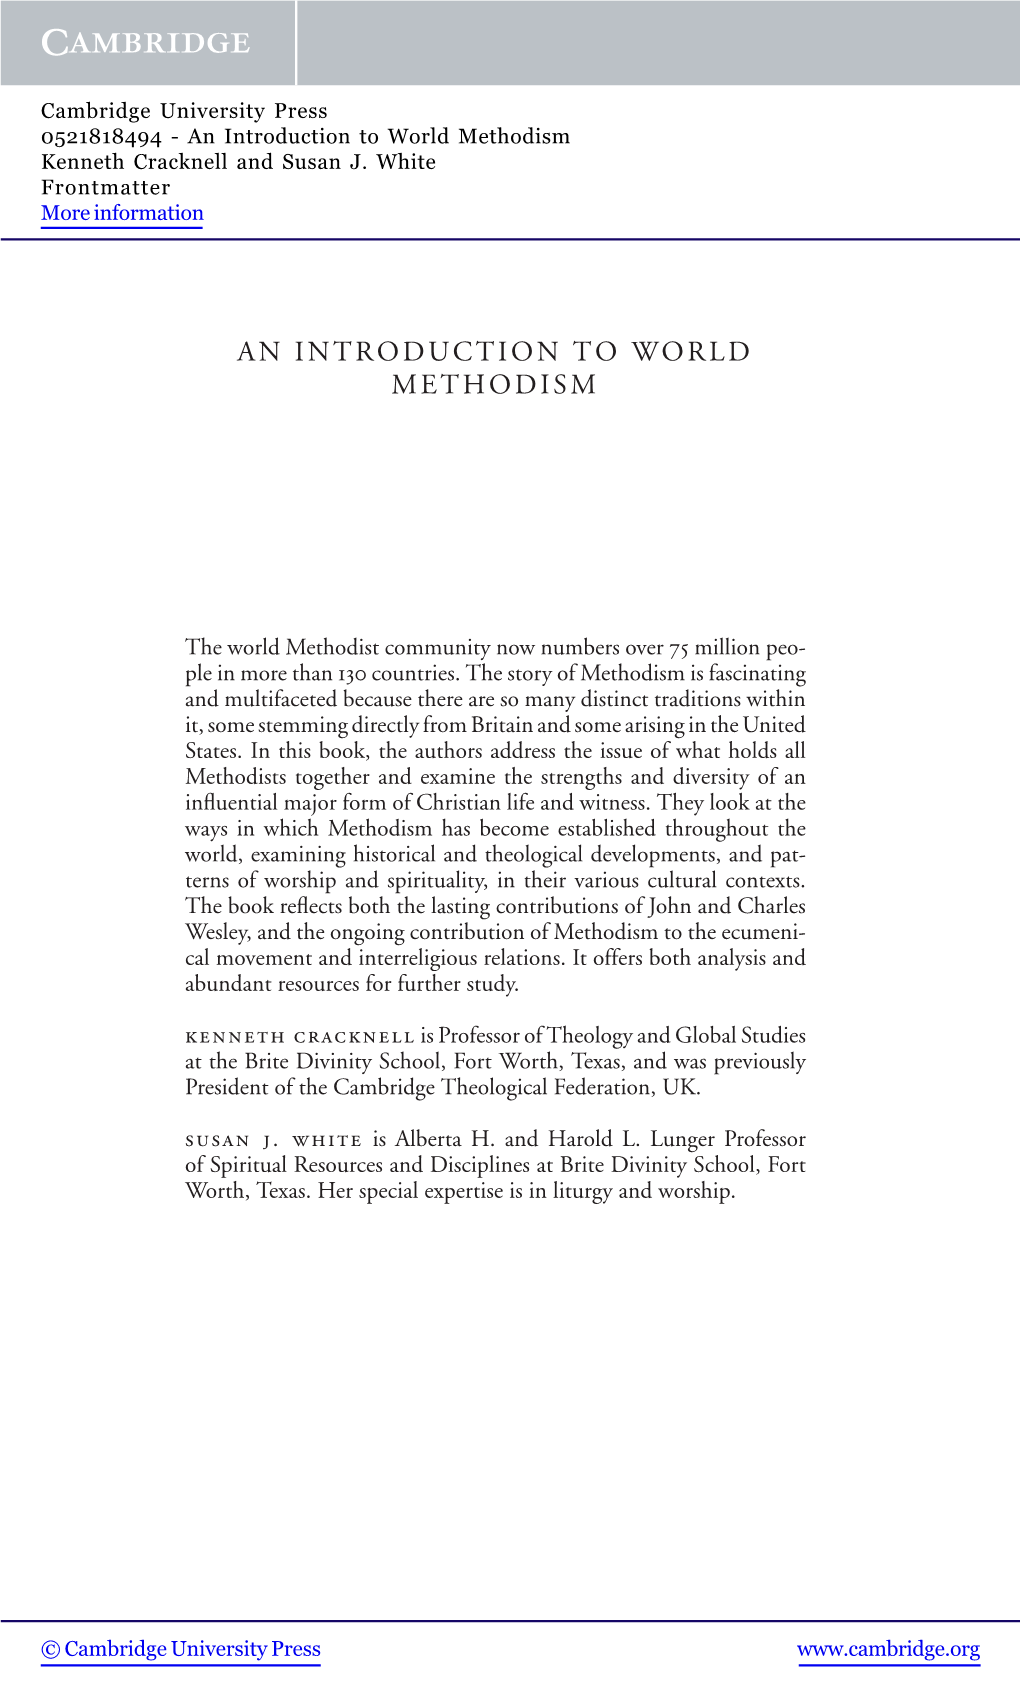 An Introduction to World Methodism Kenneth Cracknell and Susan J